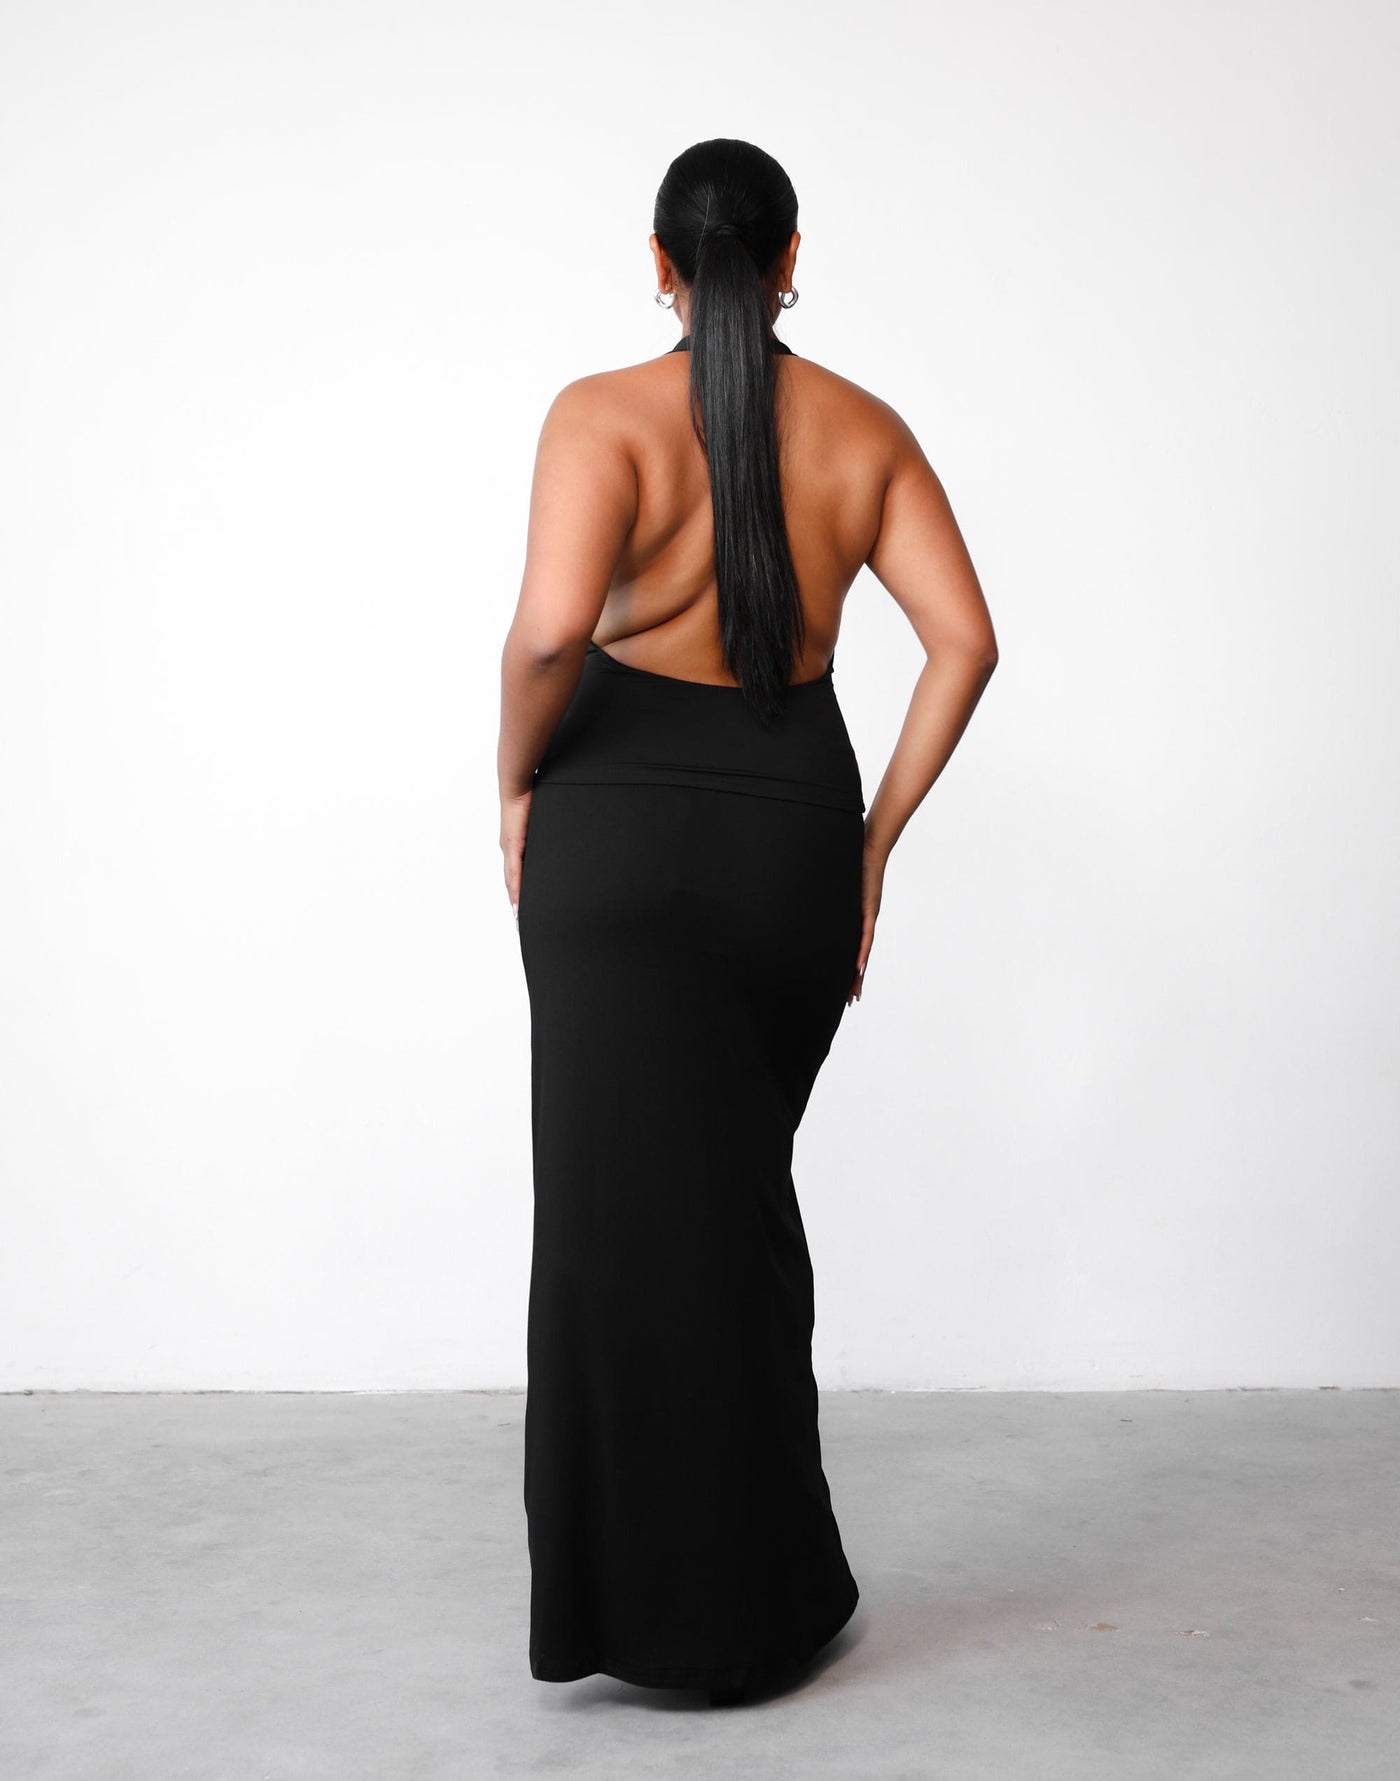 Lindsay Maxi Skirt (Black) | Charcoal Clothing Exclusive - Bodycon Jersey Maxi Skirt - Women's Skirt - Charcoal Clothing